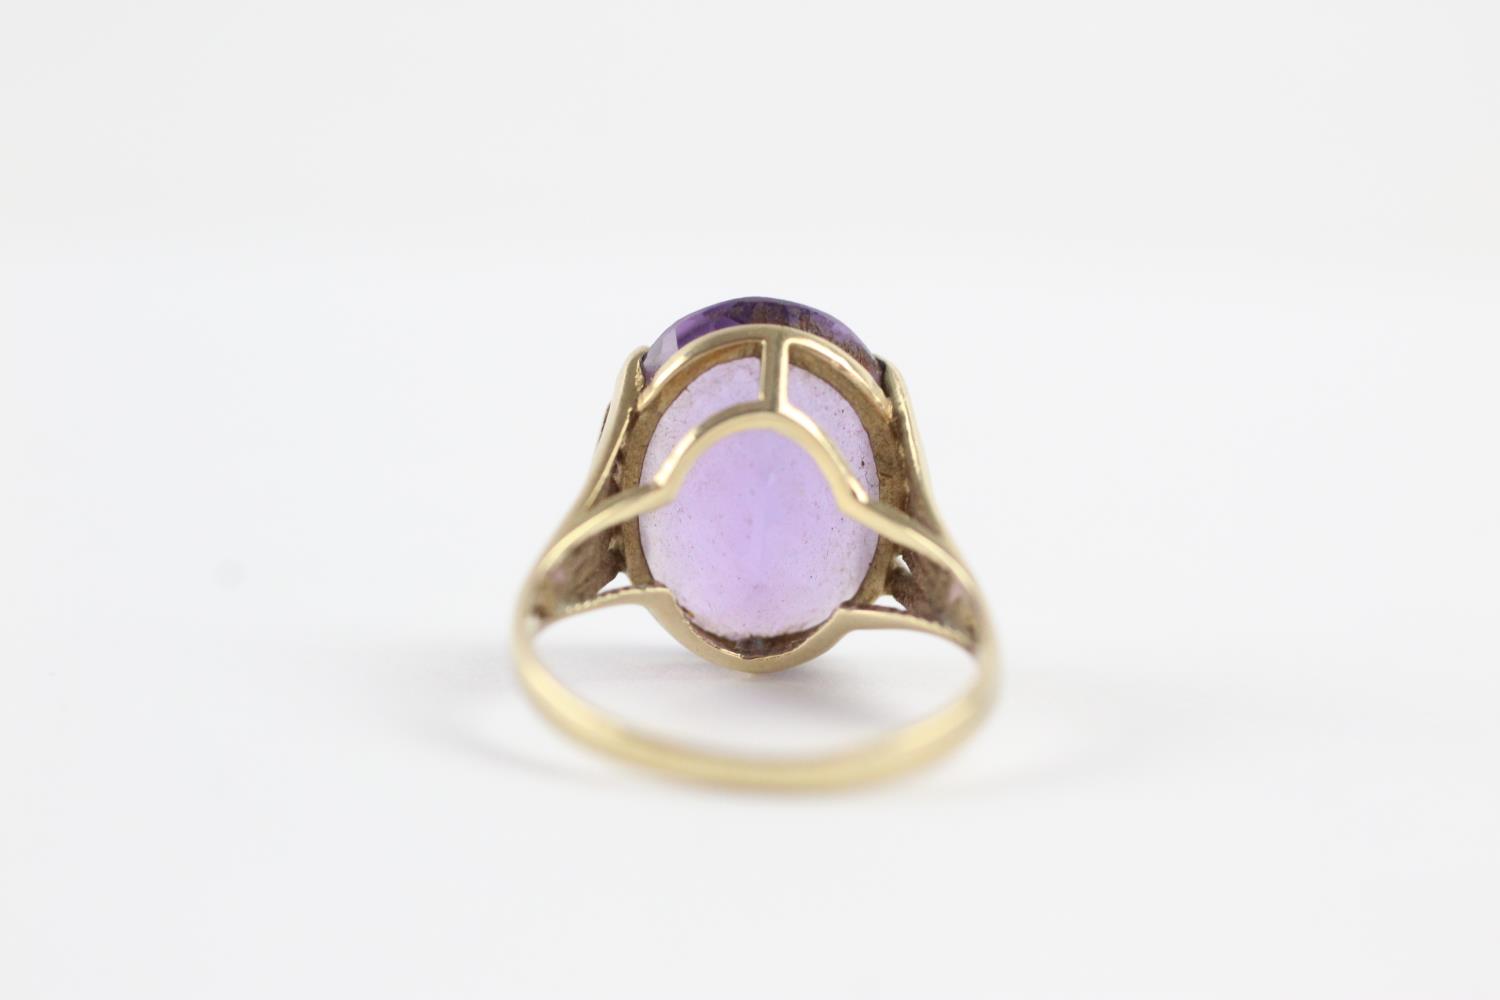 9ct gold amethyst high profile setting cocktail ring (3.8g) size O - Image 6 of 9